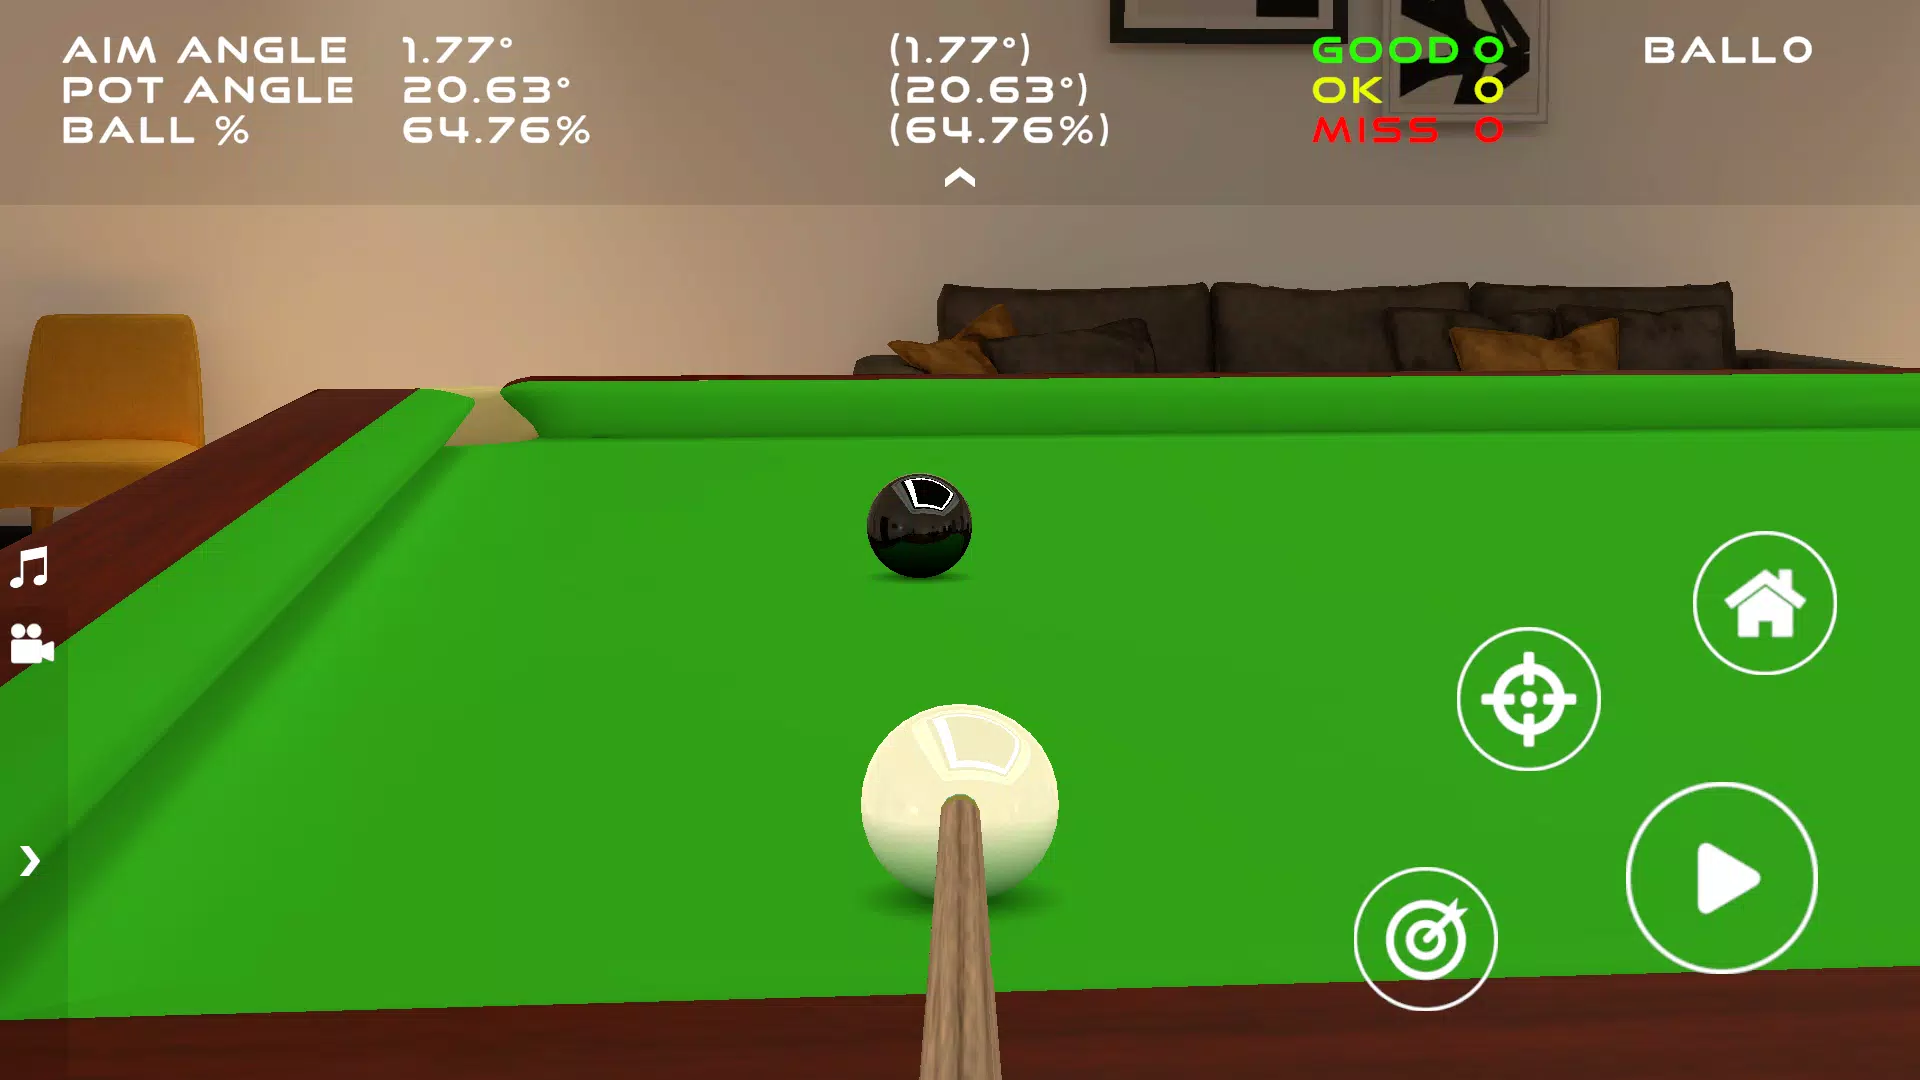 3D Snooker Potting for Android - APK Download